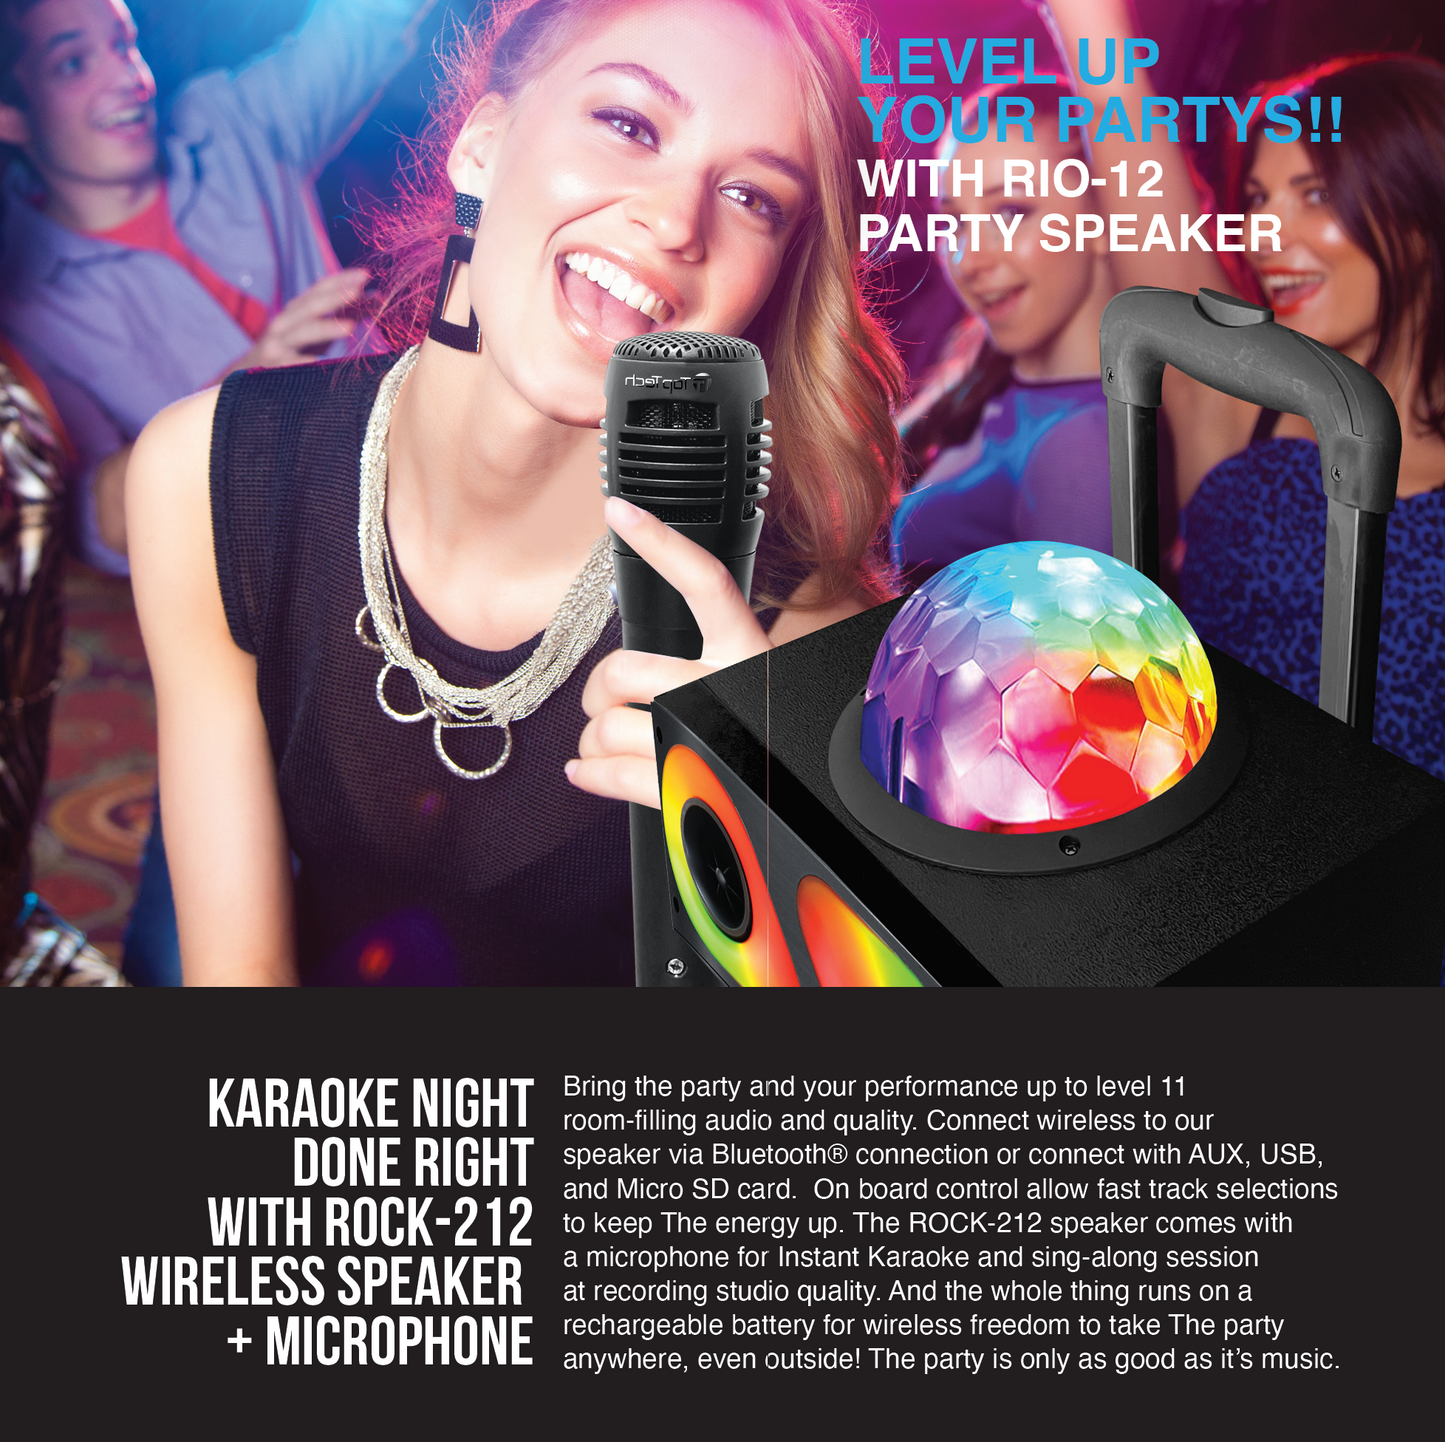 TOPTECH ROCK-212, 2*12 Inch Portable Bluetooth Speaker, Wireless TWS Stereo Sound System with Disco Flame Lights and Disco Ball,Build-in rechargeable battery, for Multimedia Connect Micophone/USB/TF Card/Karaoke Inputs/Aux/FM Radio/Remote Control